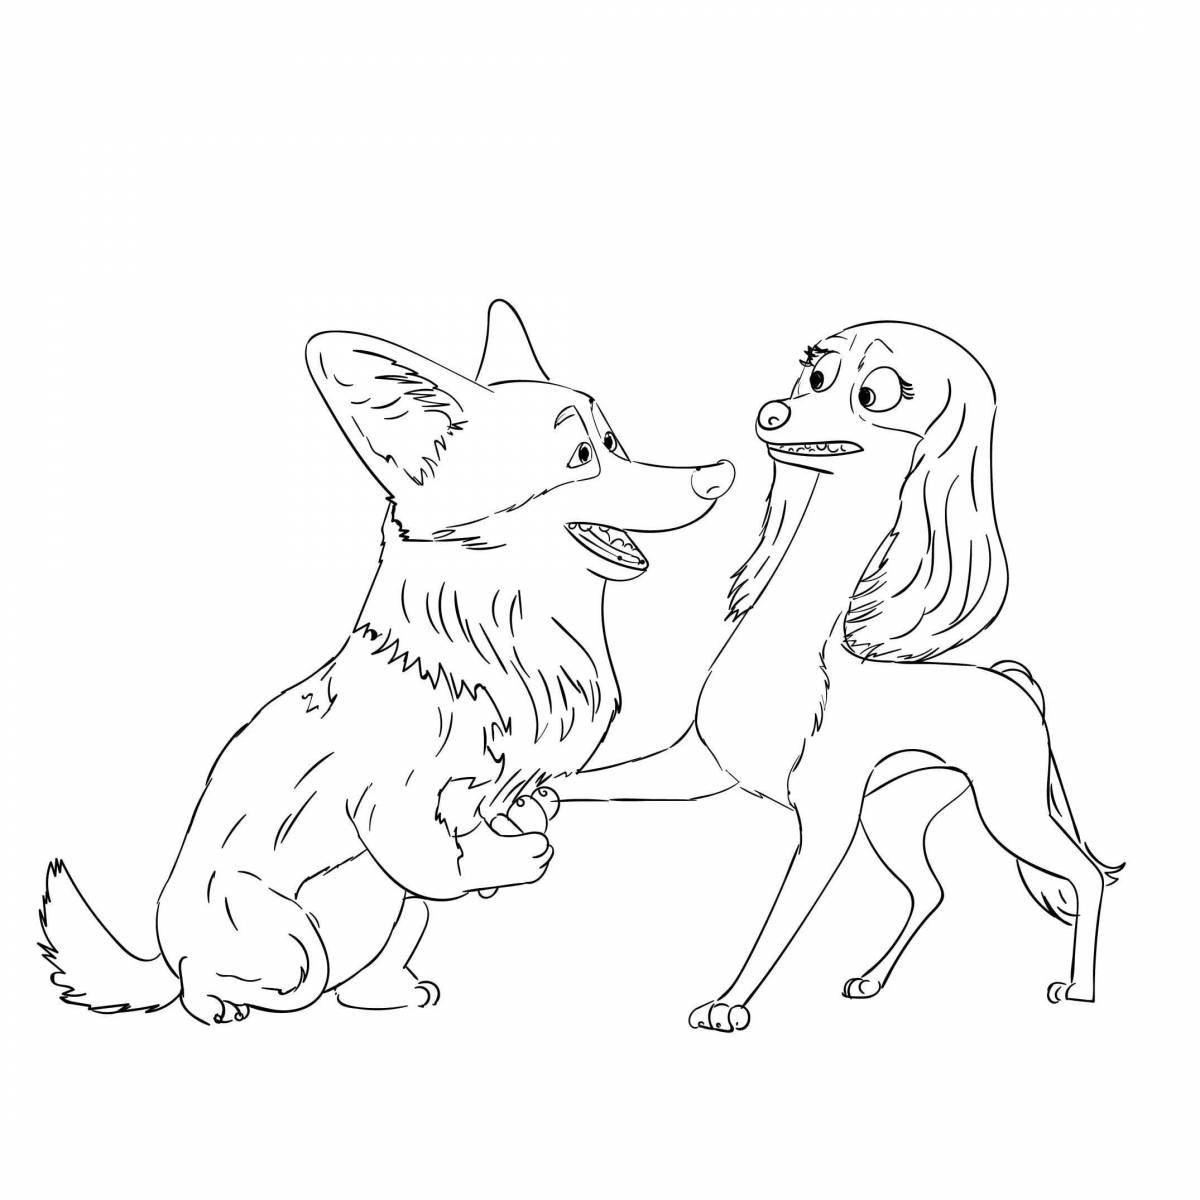 Corgi coloring pages for kids